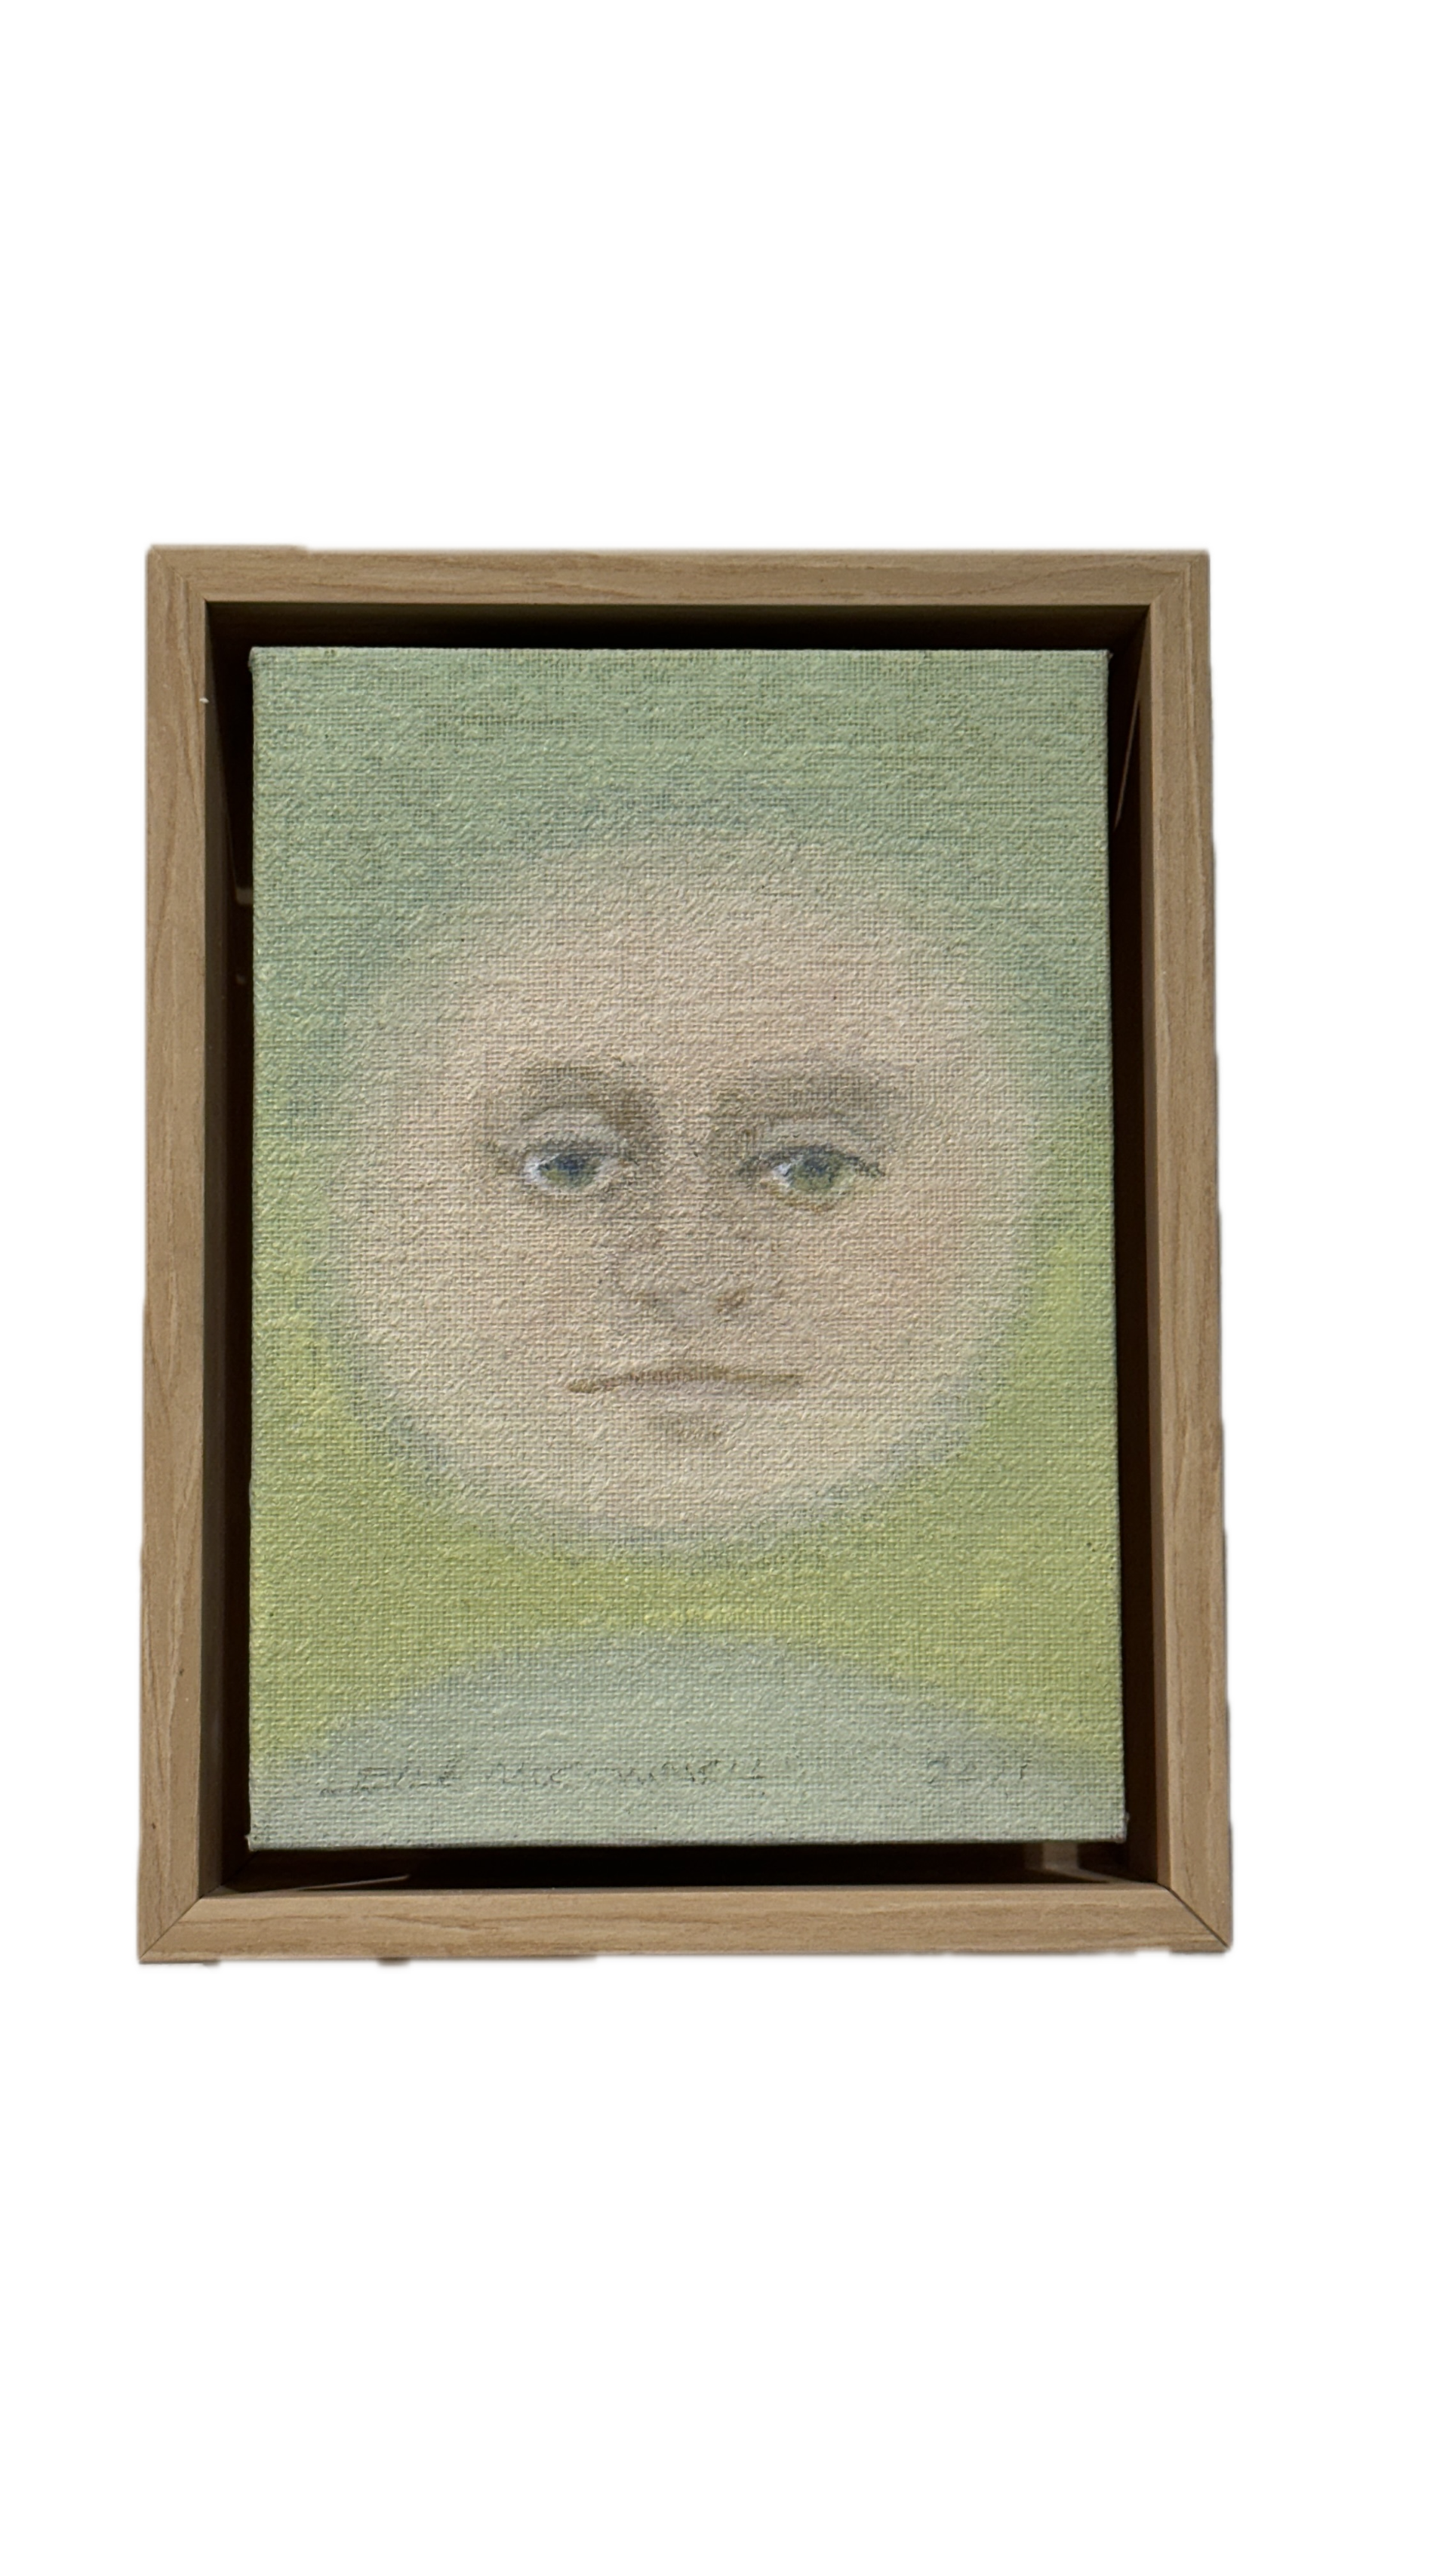 Moonface - pale pink on yellow/green by Leila McConnell